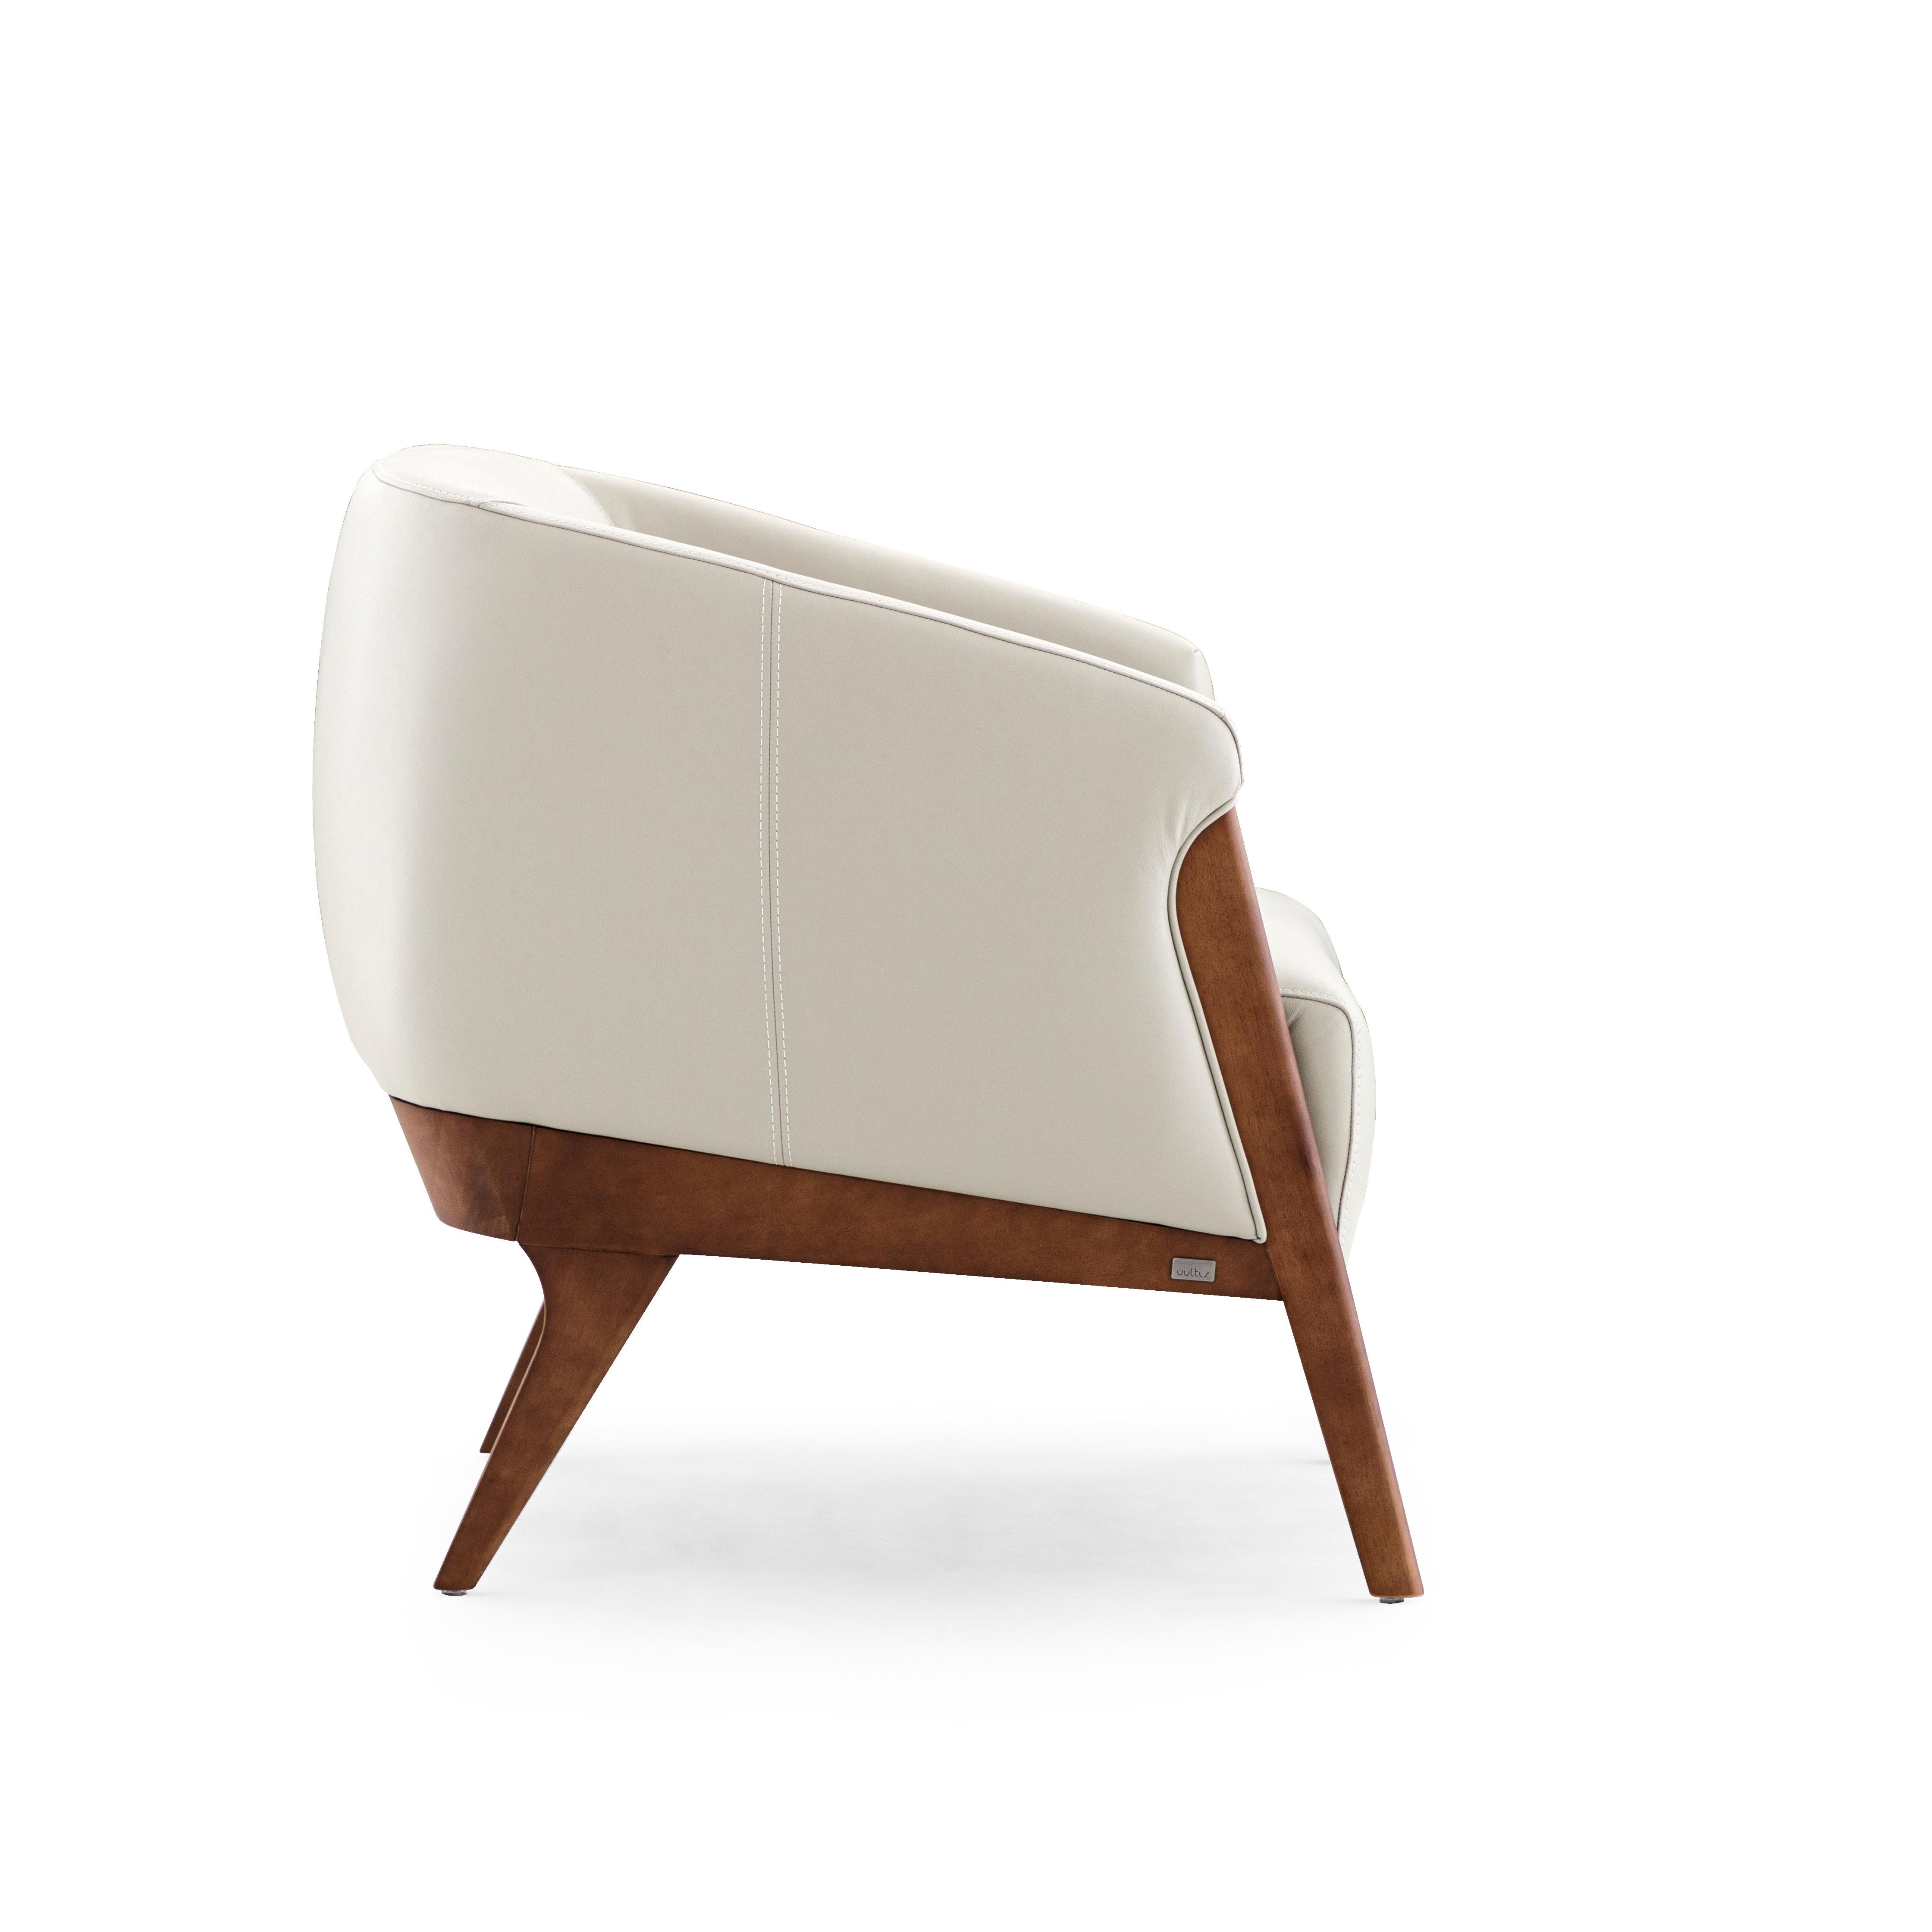 Brazilian Abra Armchair in White Leather and Walnut Wood Finish For Sale